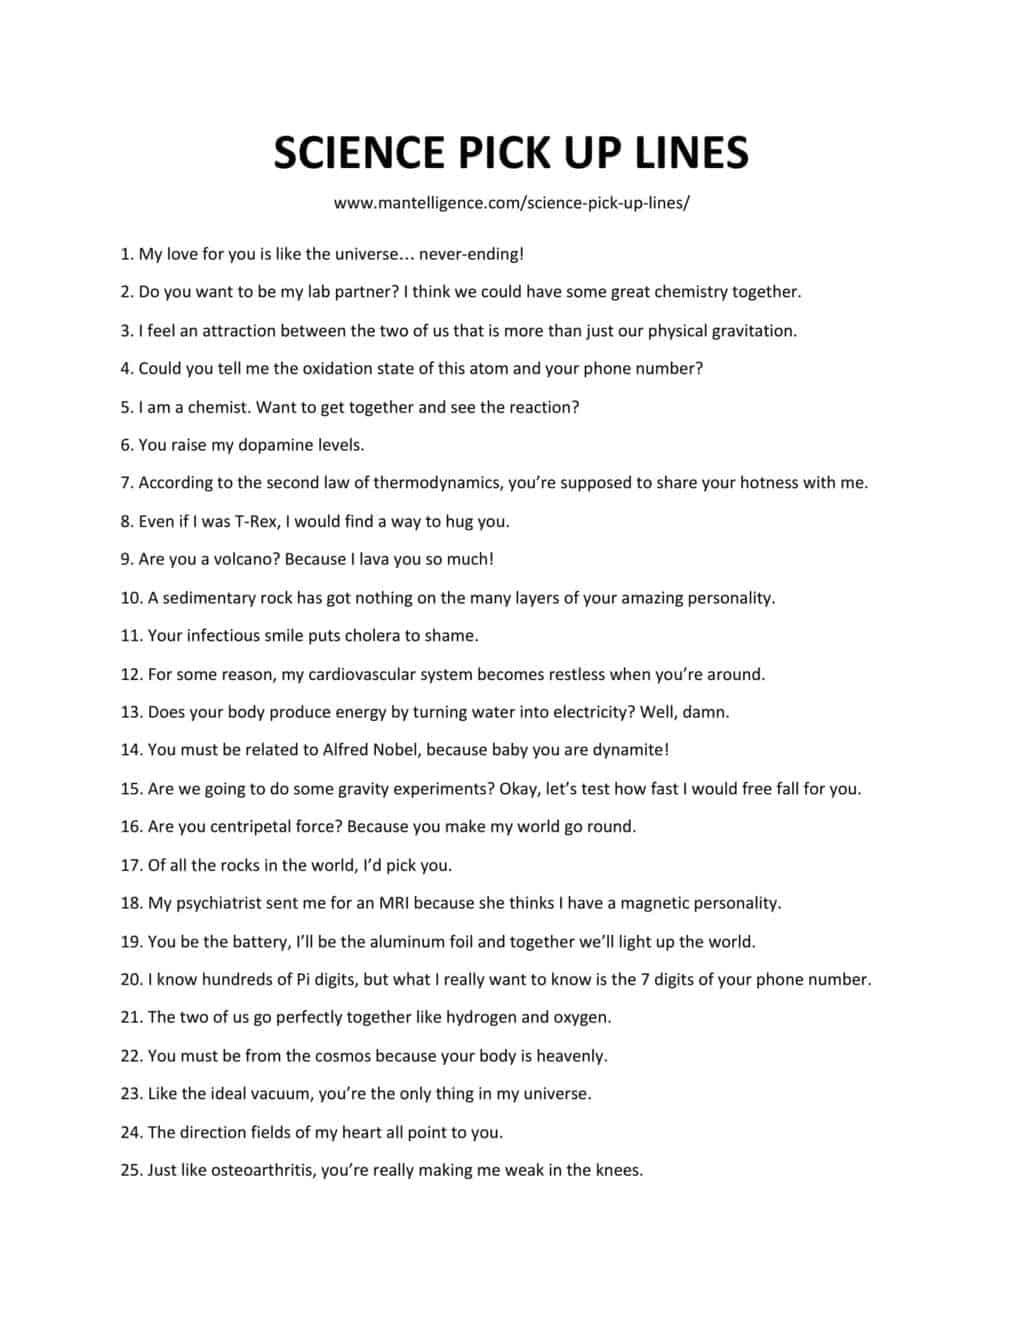 Phd pick up lines